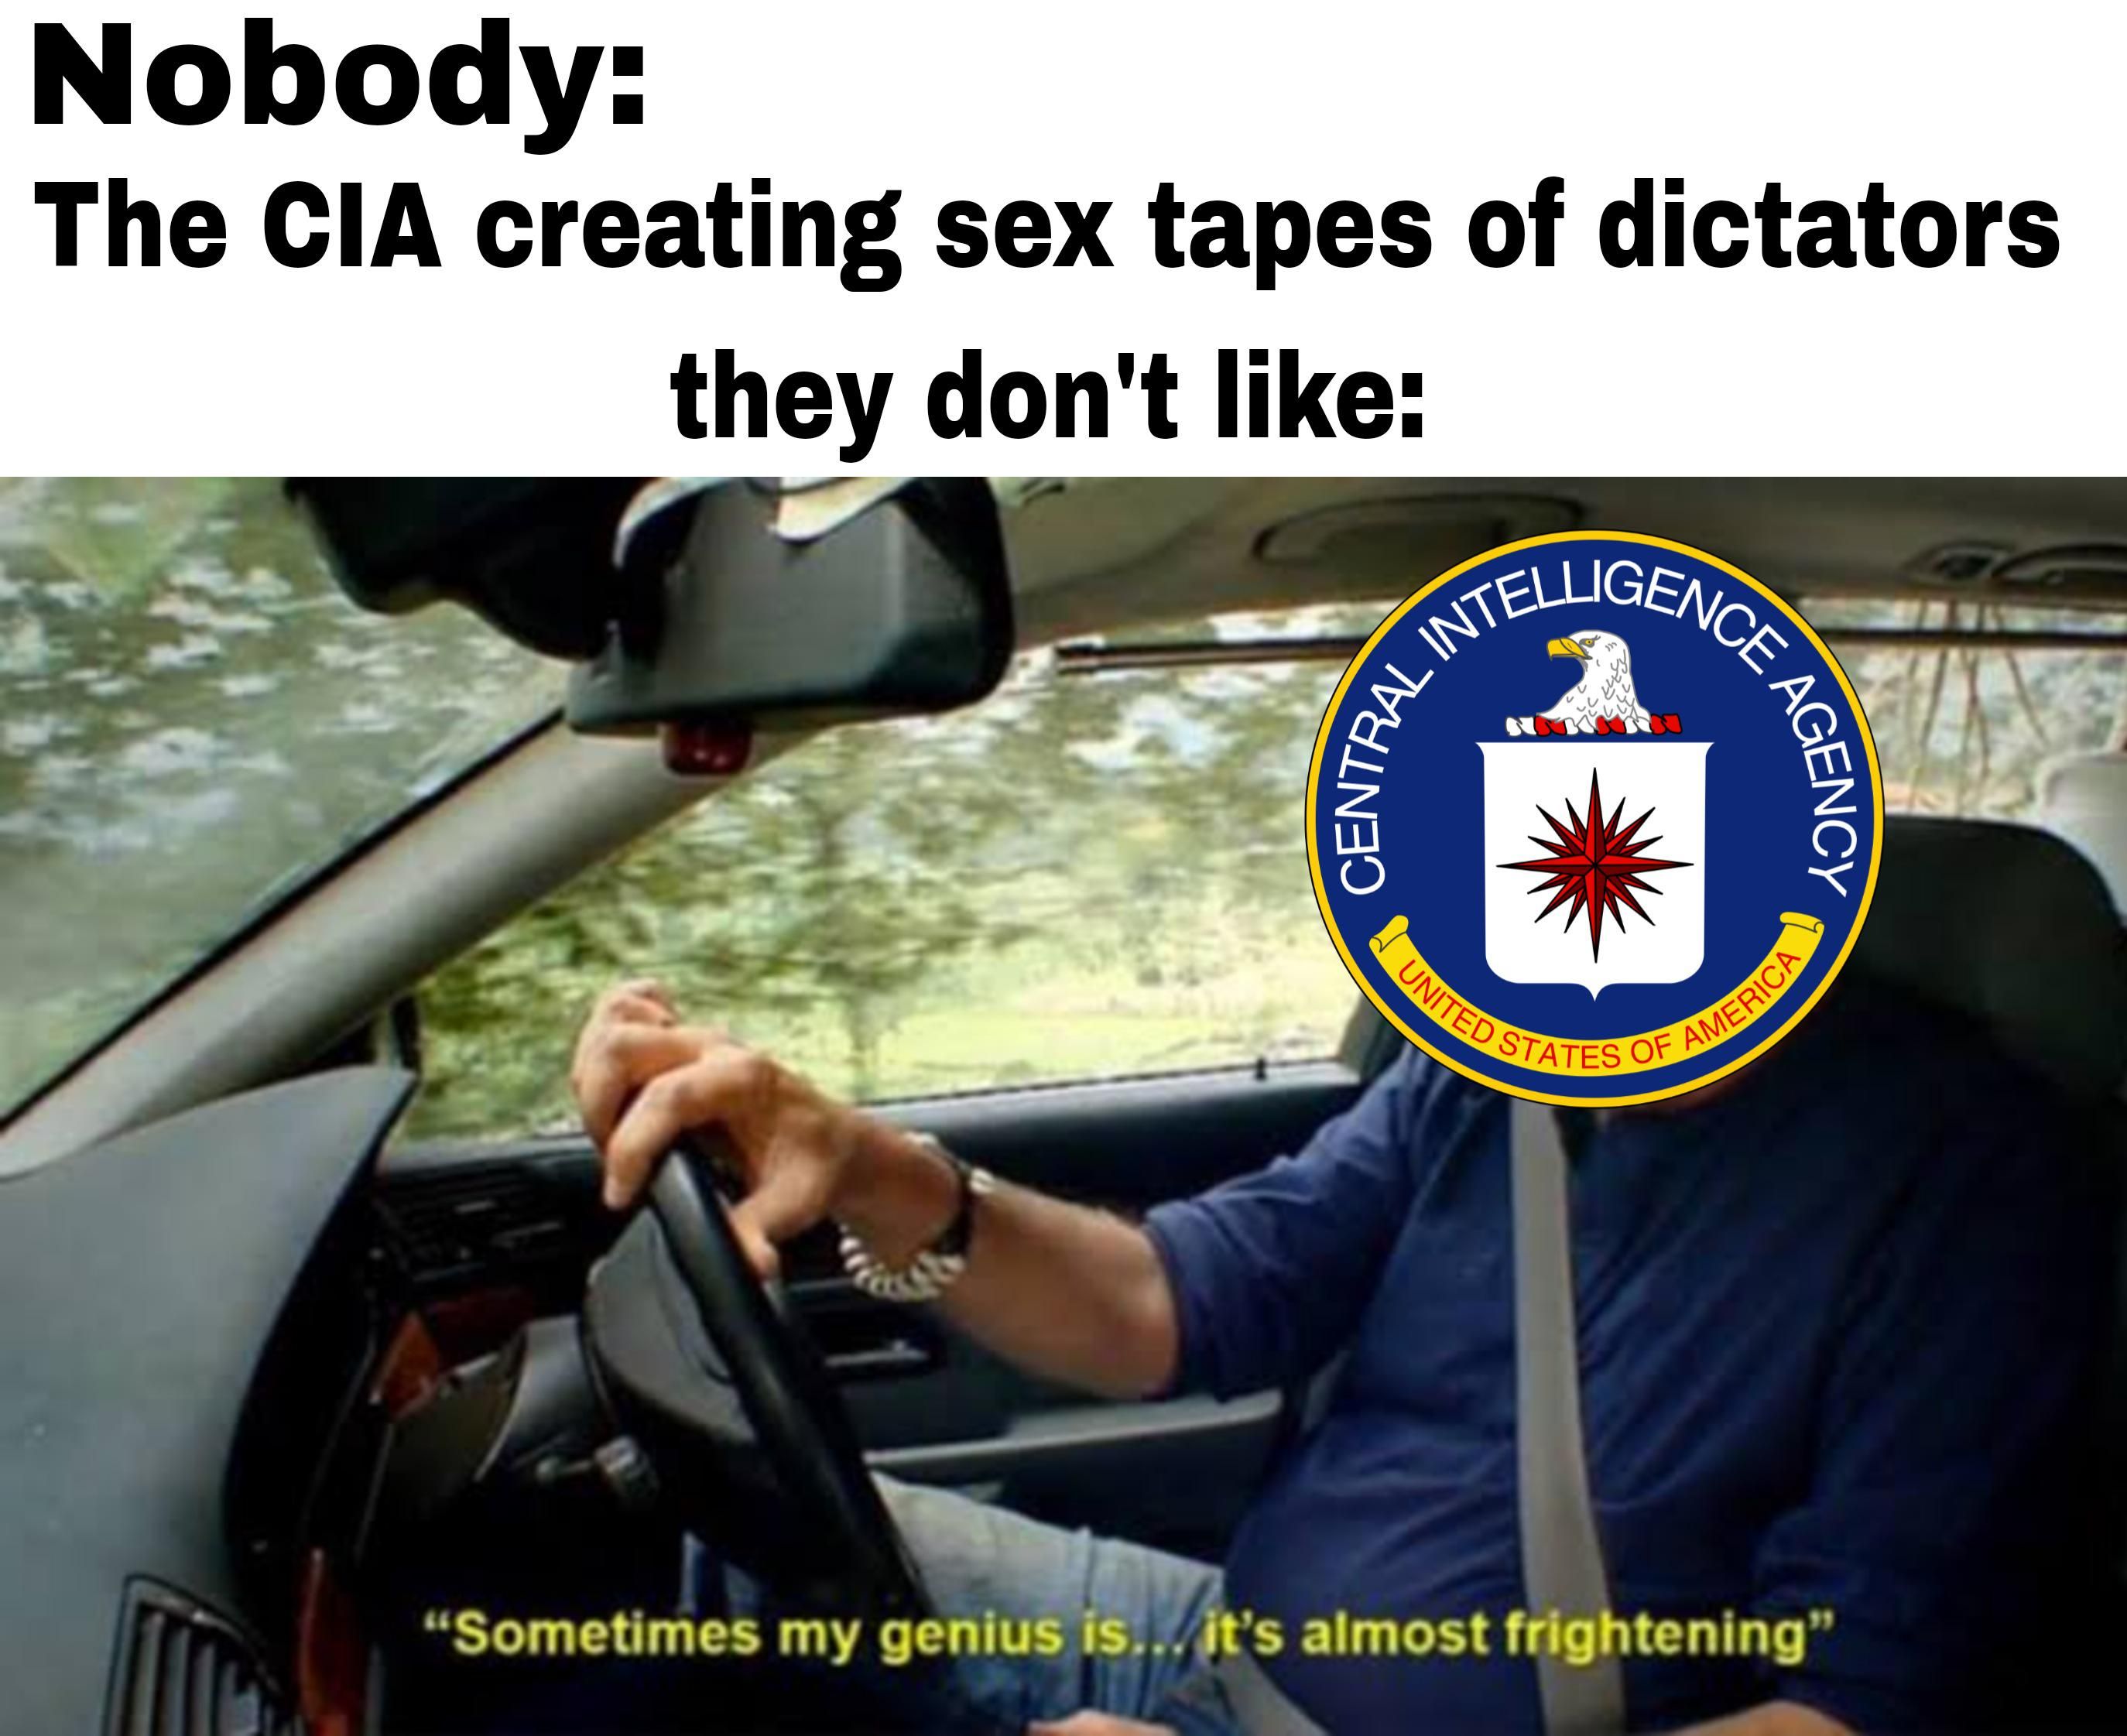 We only know of 2 occasions in which the CIA has tried to created dictators sex tapes, there are probably more.